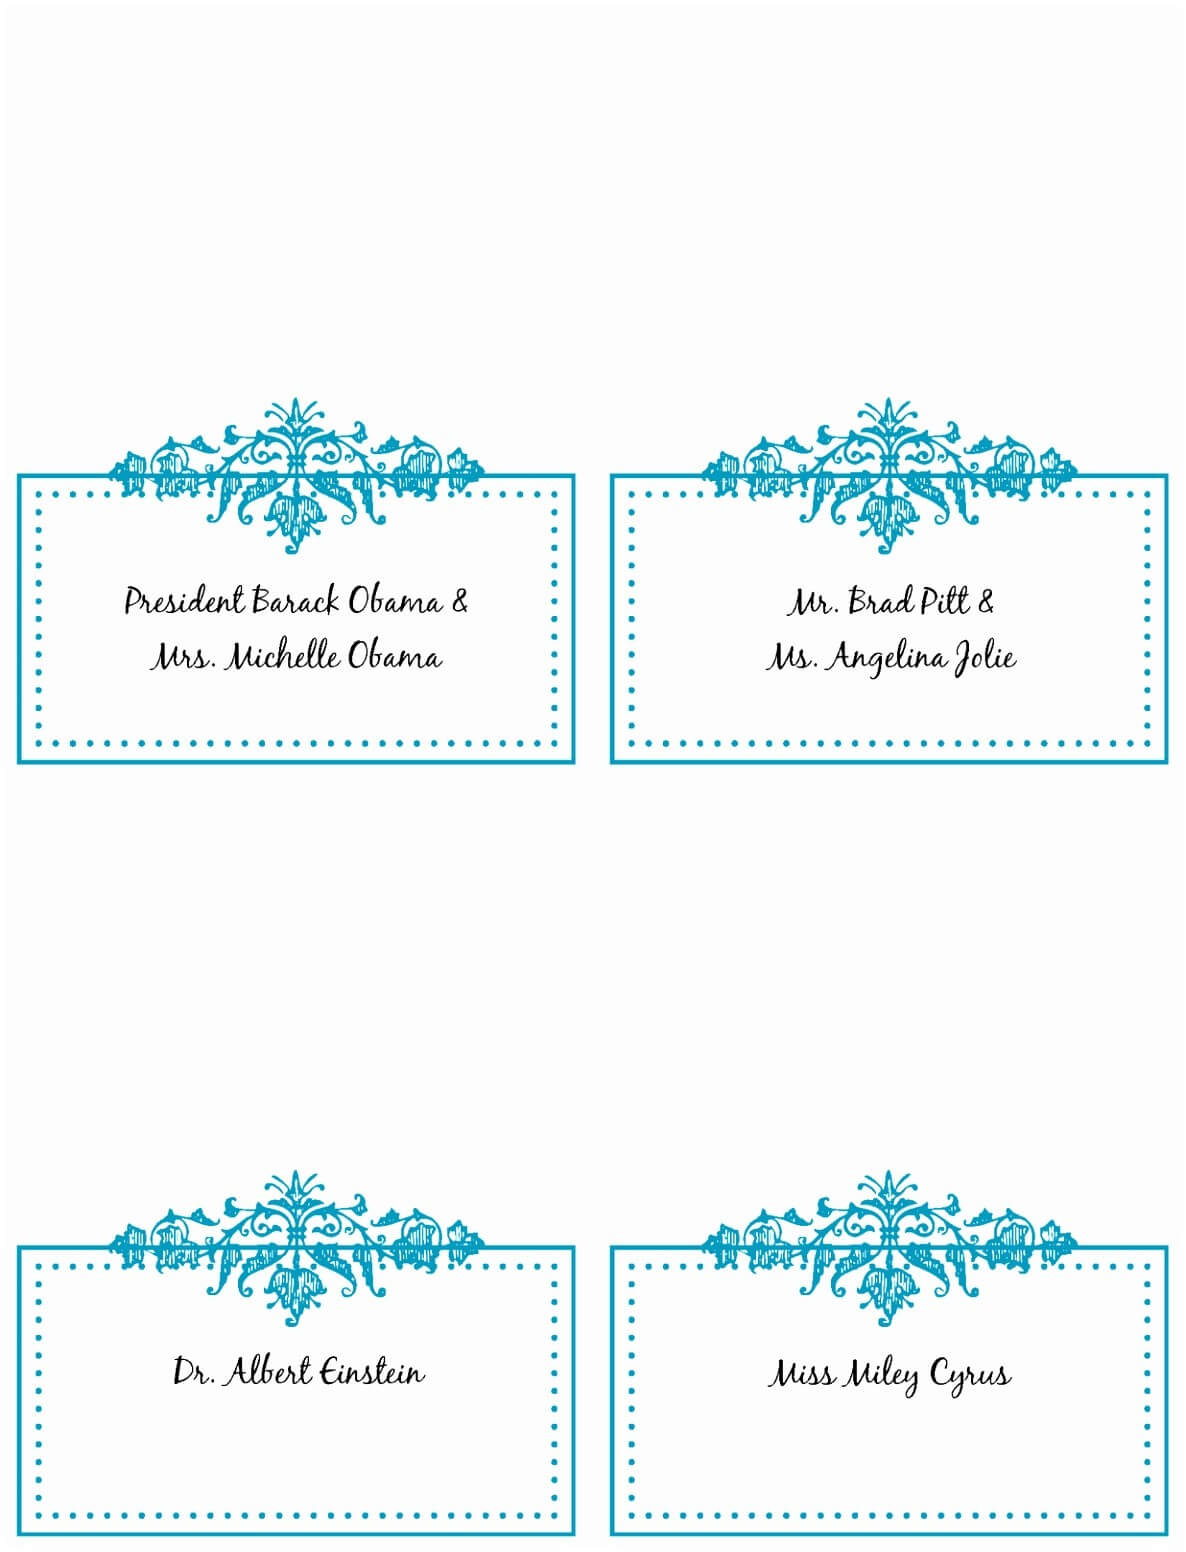 027 Template Ideas Printable Place Cards Sample Free Card Regarding Paper Source Templates Place Cards